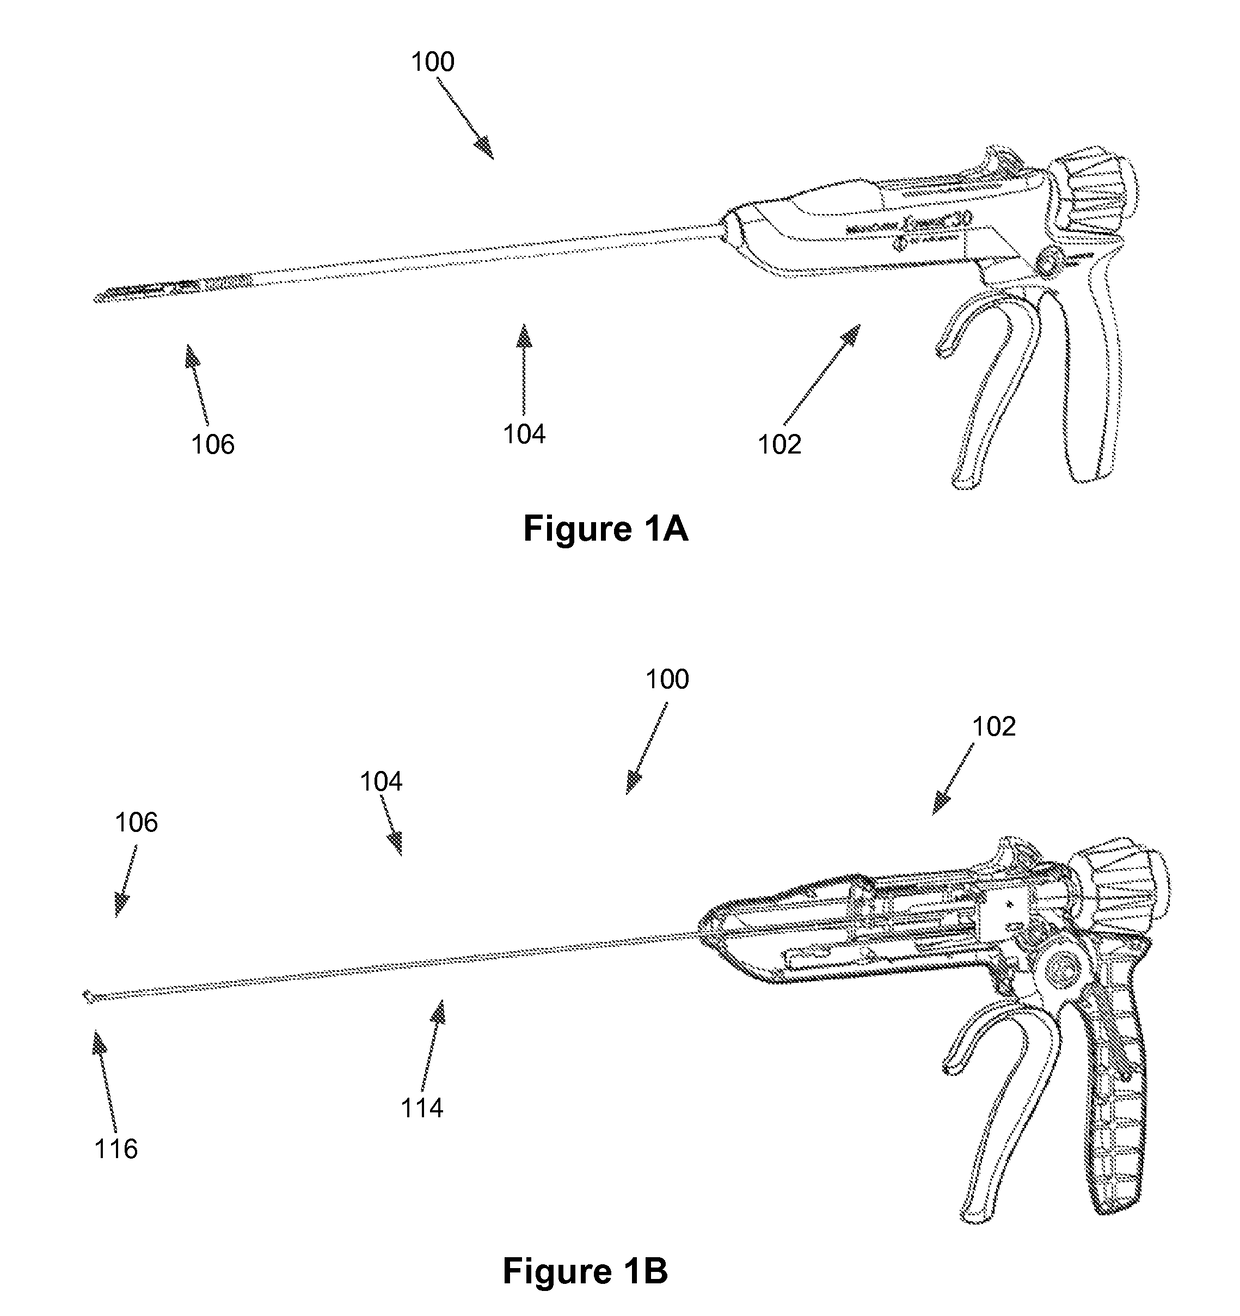 Surgical stapling and cutting apparatus—deployment mechanisms, systems and methods